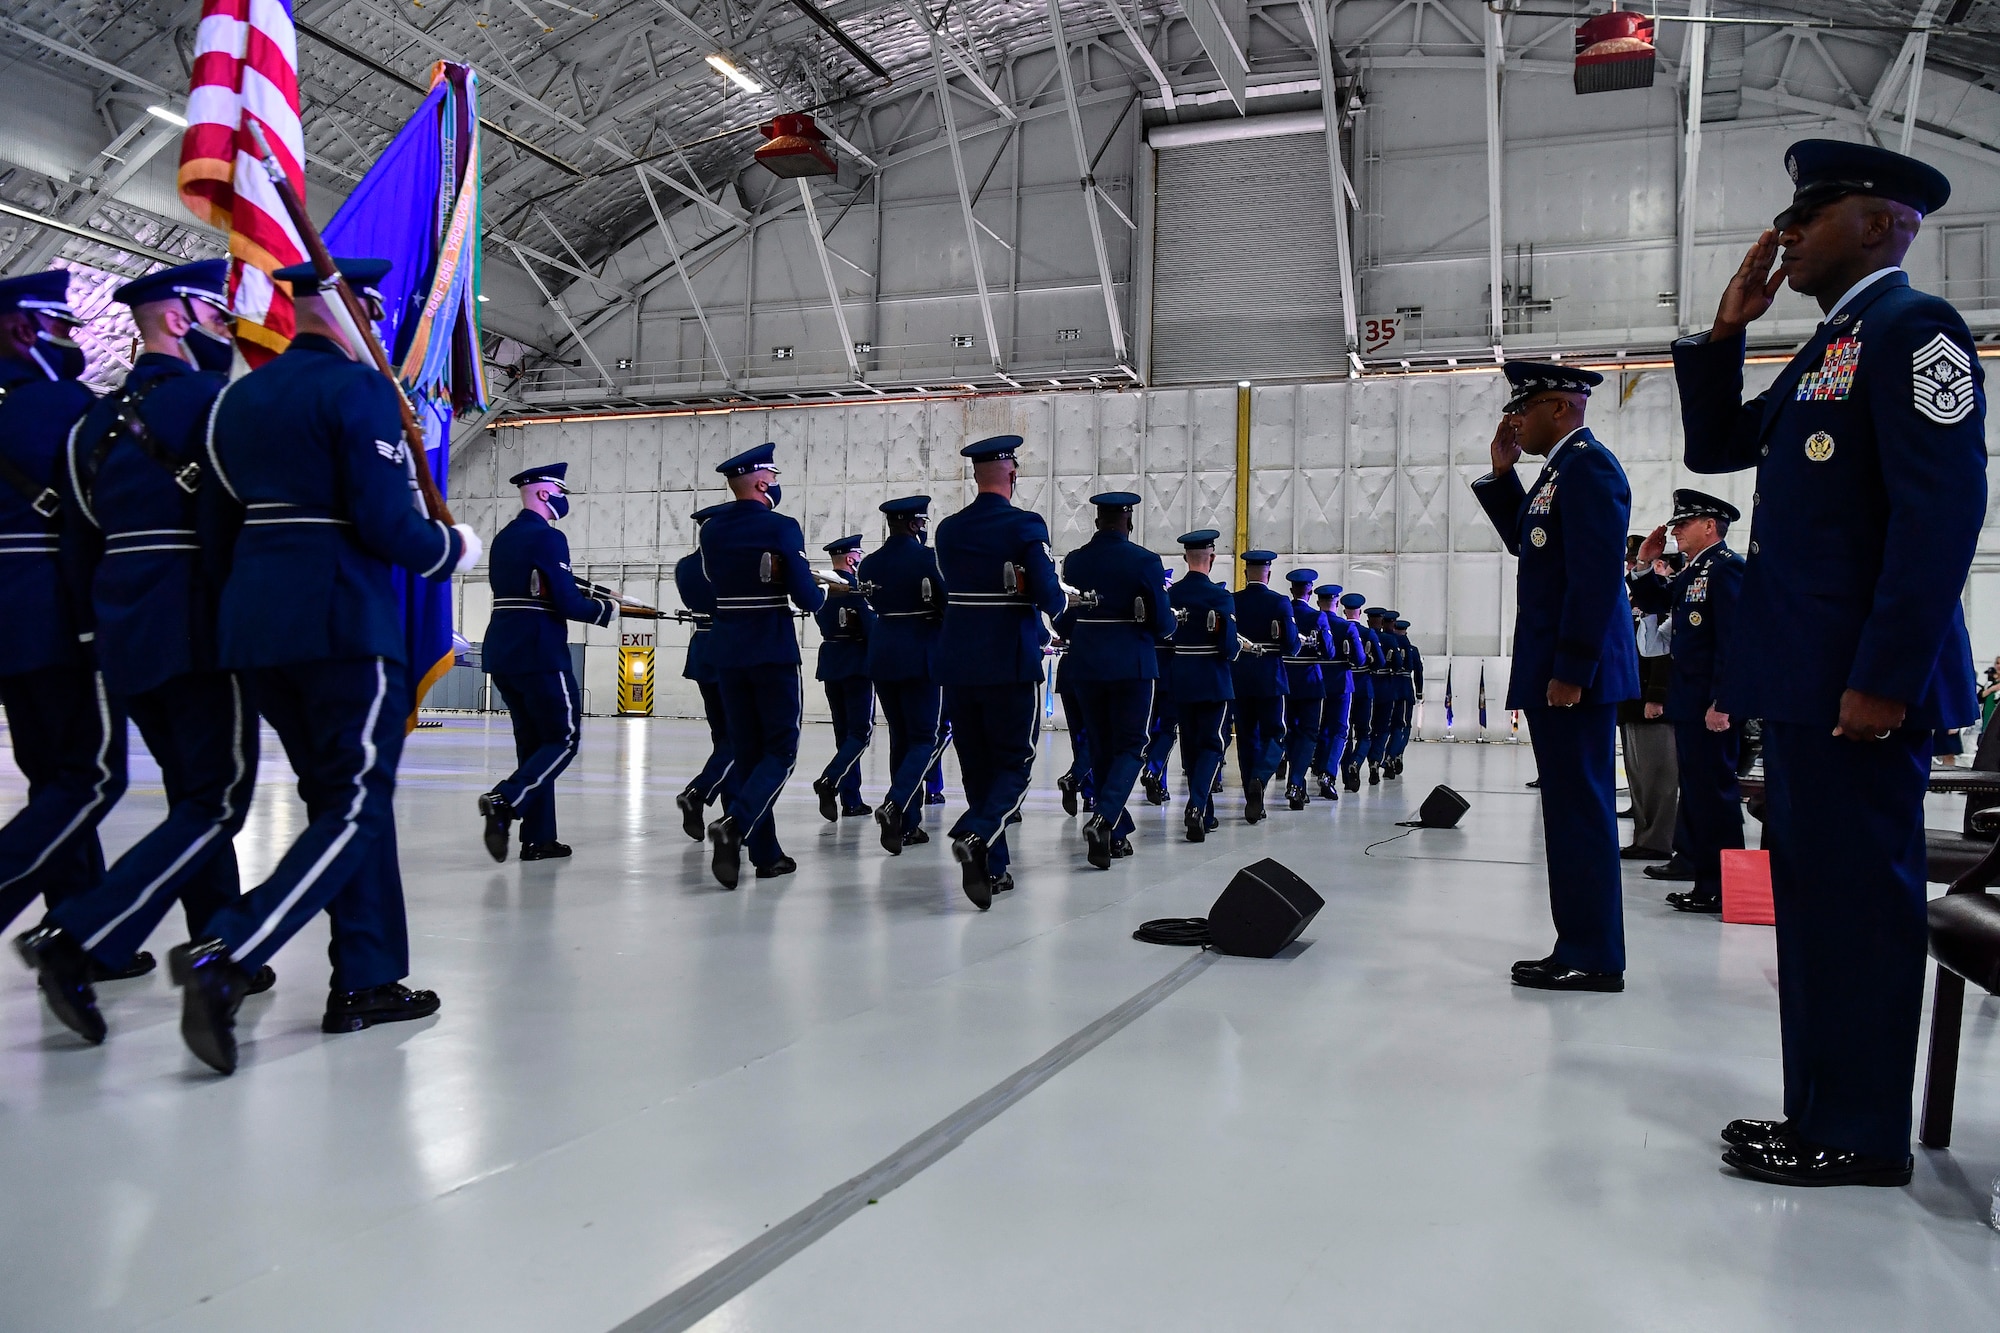 The Air Force Honor Guard performs a pass in review in front of Air Force Chief of Staff Gen. Charles Q. Brown Jr. during a transition ceremony at Joint Base Andrews, Md., Aug. 6, 2020. Brown replaced Gen. David L. Goldfein as the 22nd chief of staff. (U.S. Air Force photo by Eric Dietrich)